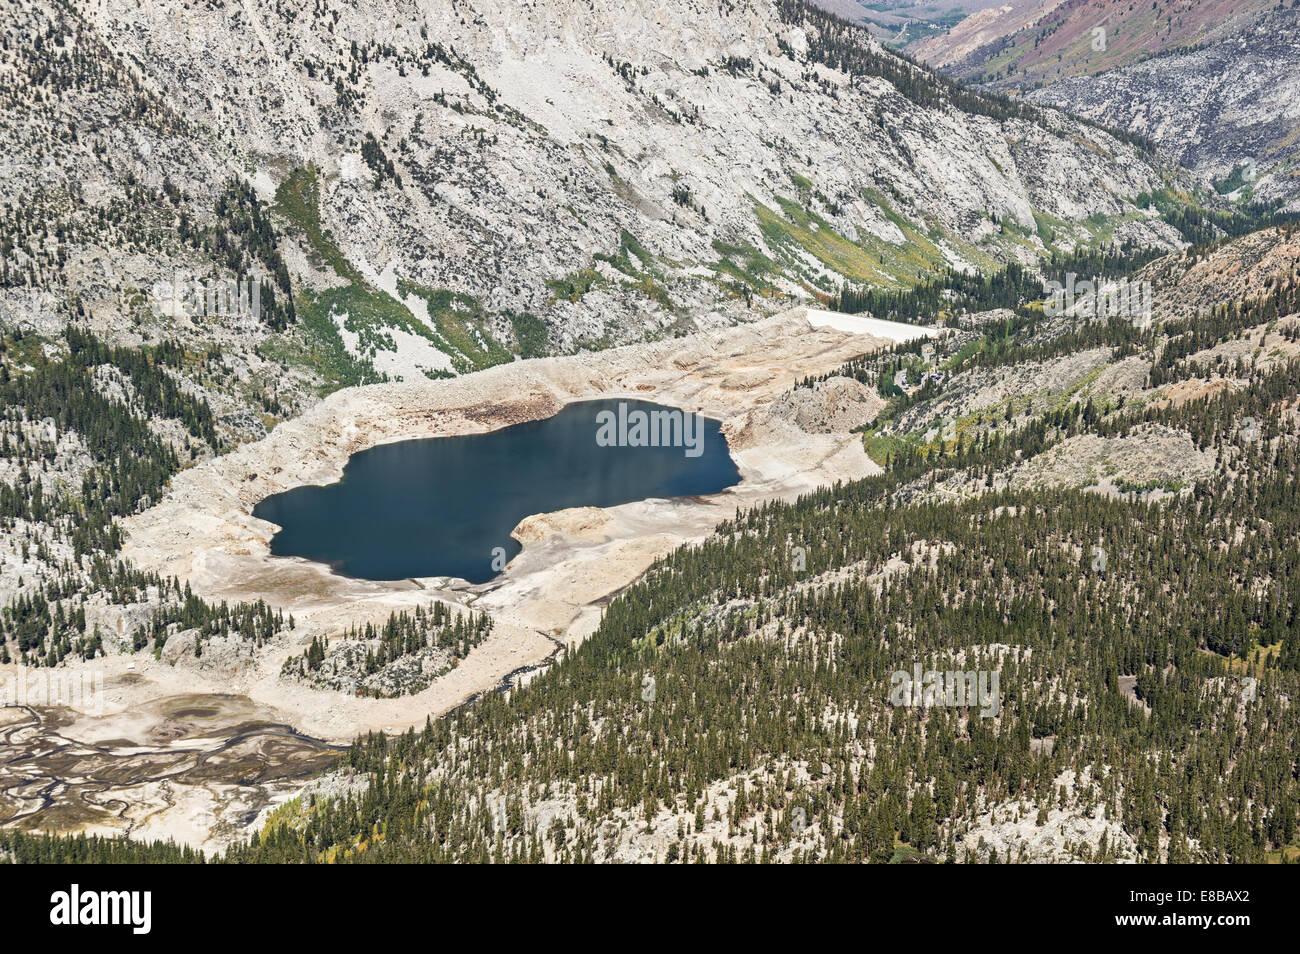 aerial view showing low water level in South Lake reservoir in California because of drought Stock Photo